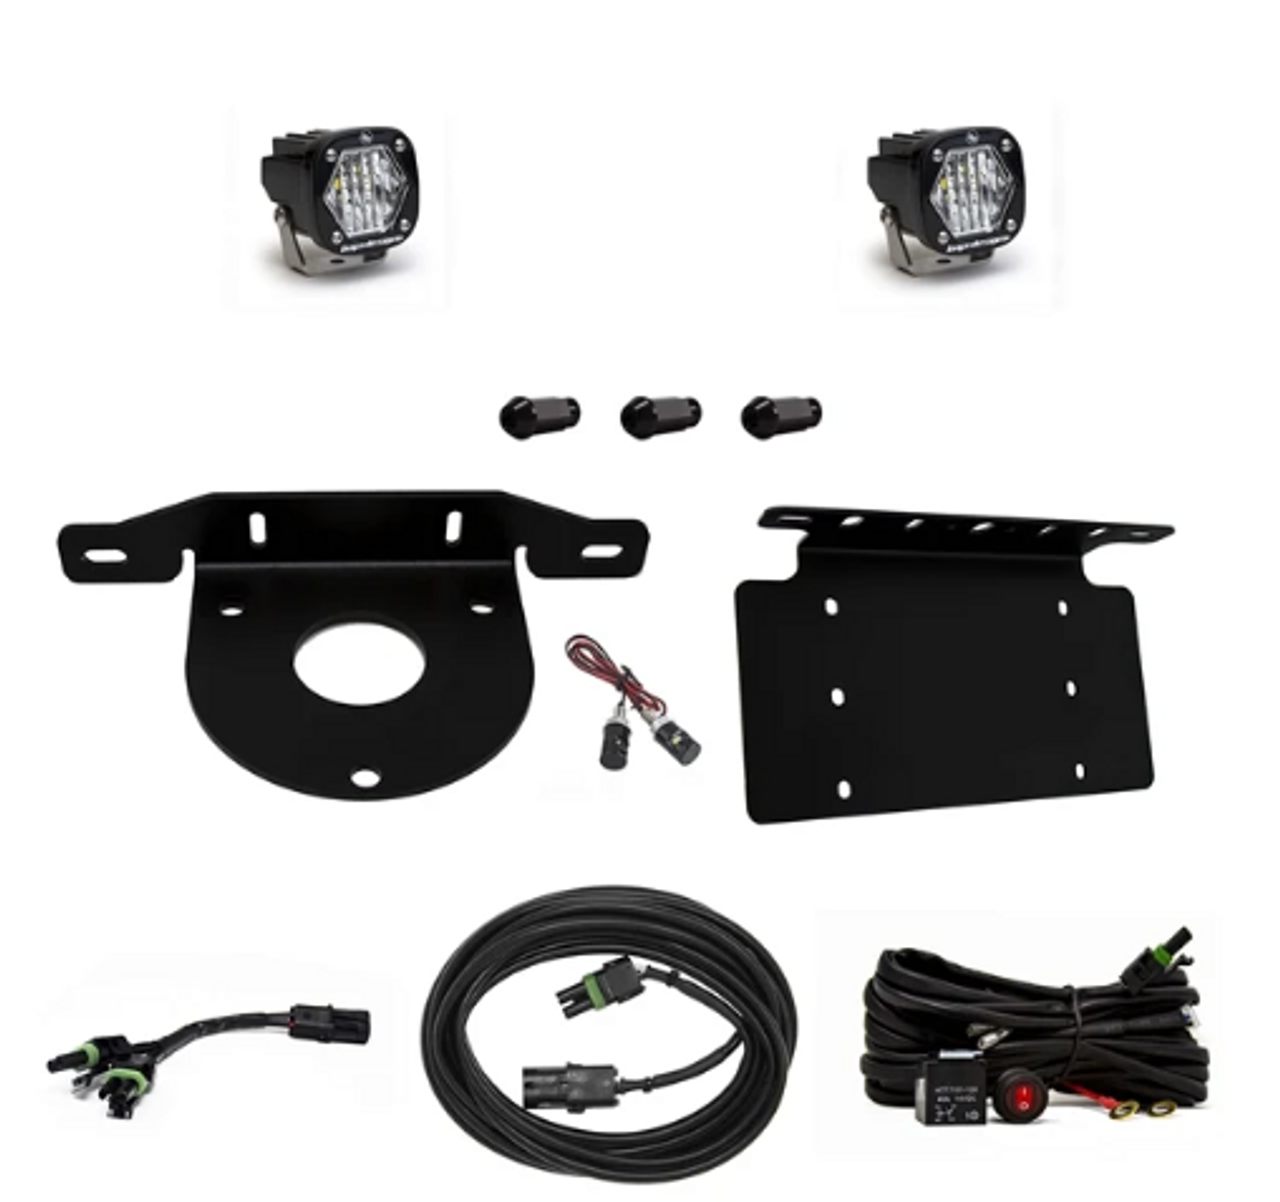 Baja Designs 447765 Dual S1 Series W/C Reverse Kit & License Plate Mount for Ford Bronco 2021+